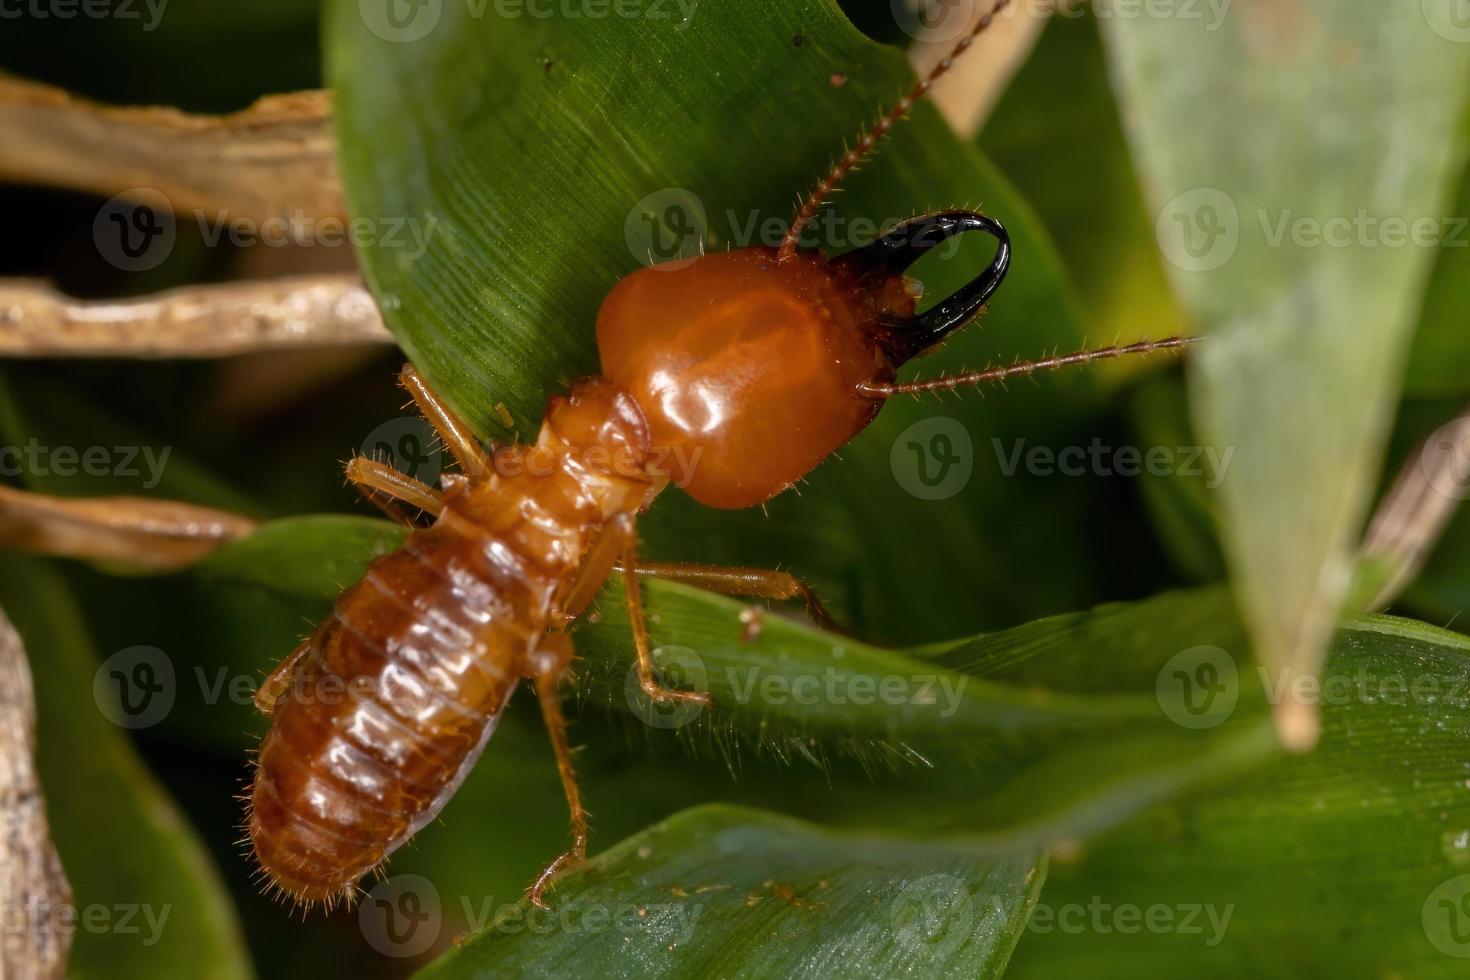 Adult Jawsnouted Termite photo